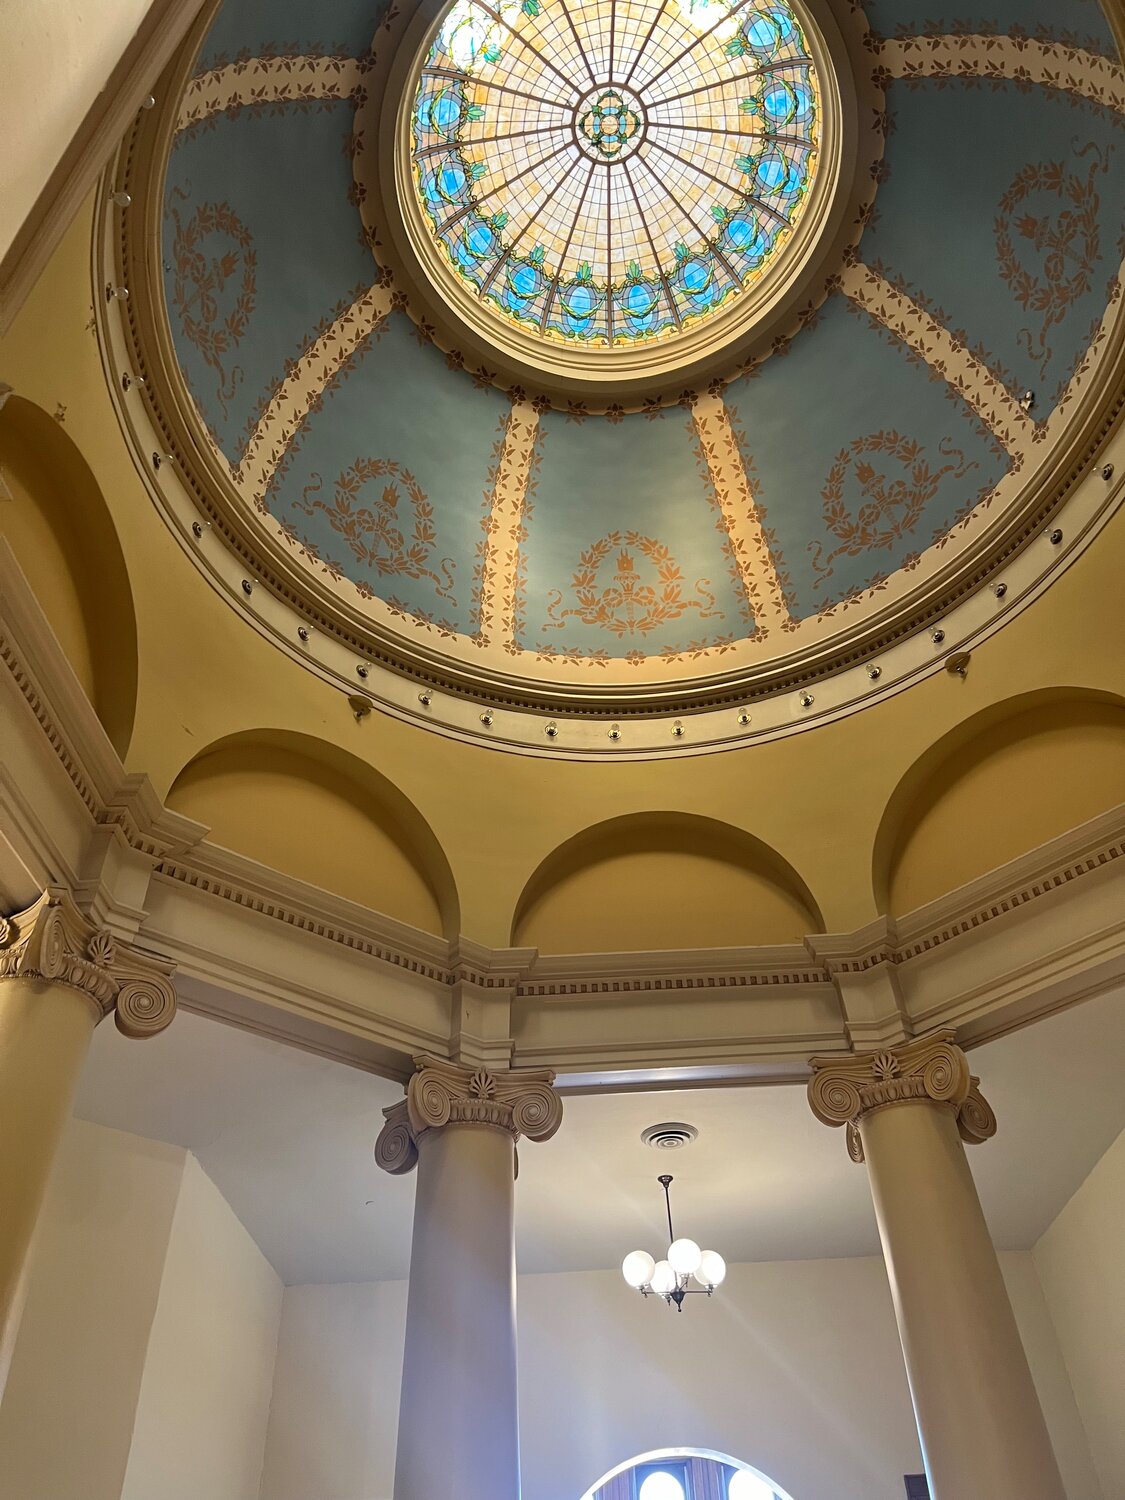 Renovations are planned this year on the outside of the Hastings City Hall dome. A false ceiling under the dome was removed when the City of Hastings bought the building. It had been installed during World War II when fear existed that buildings in the United States could be bombed, and that light from the dome would be visible from above.